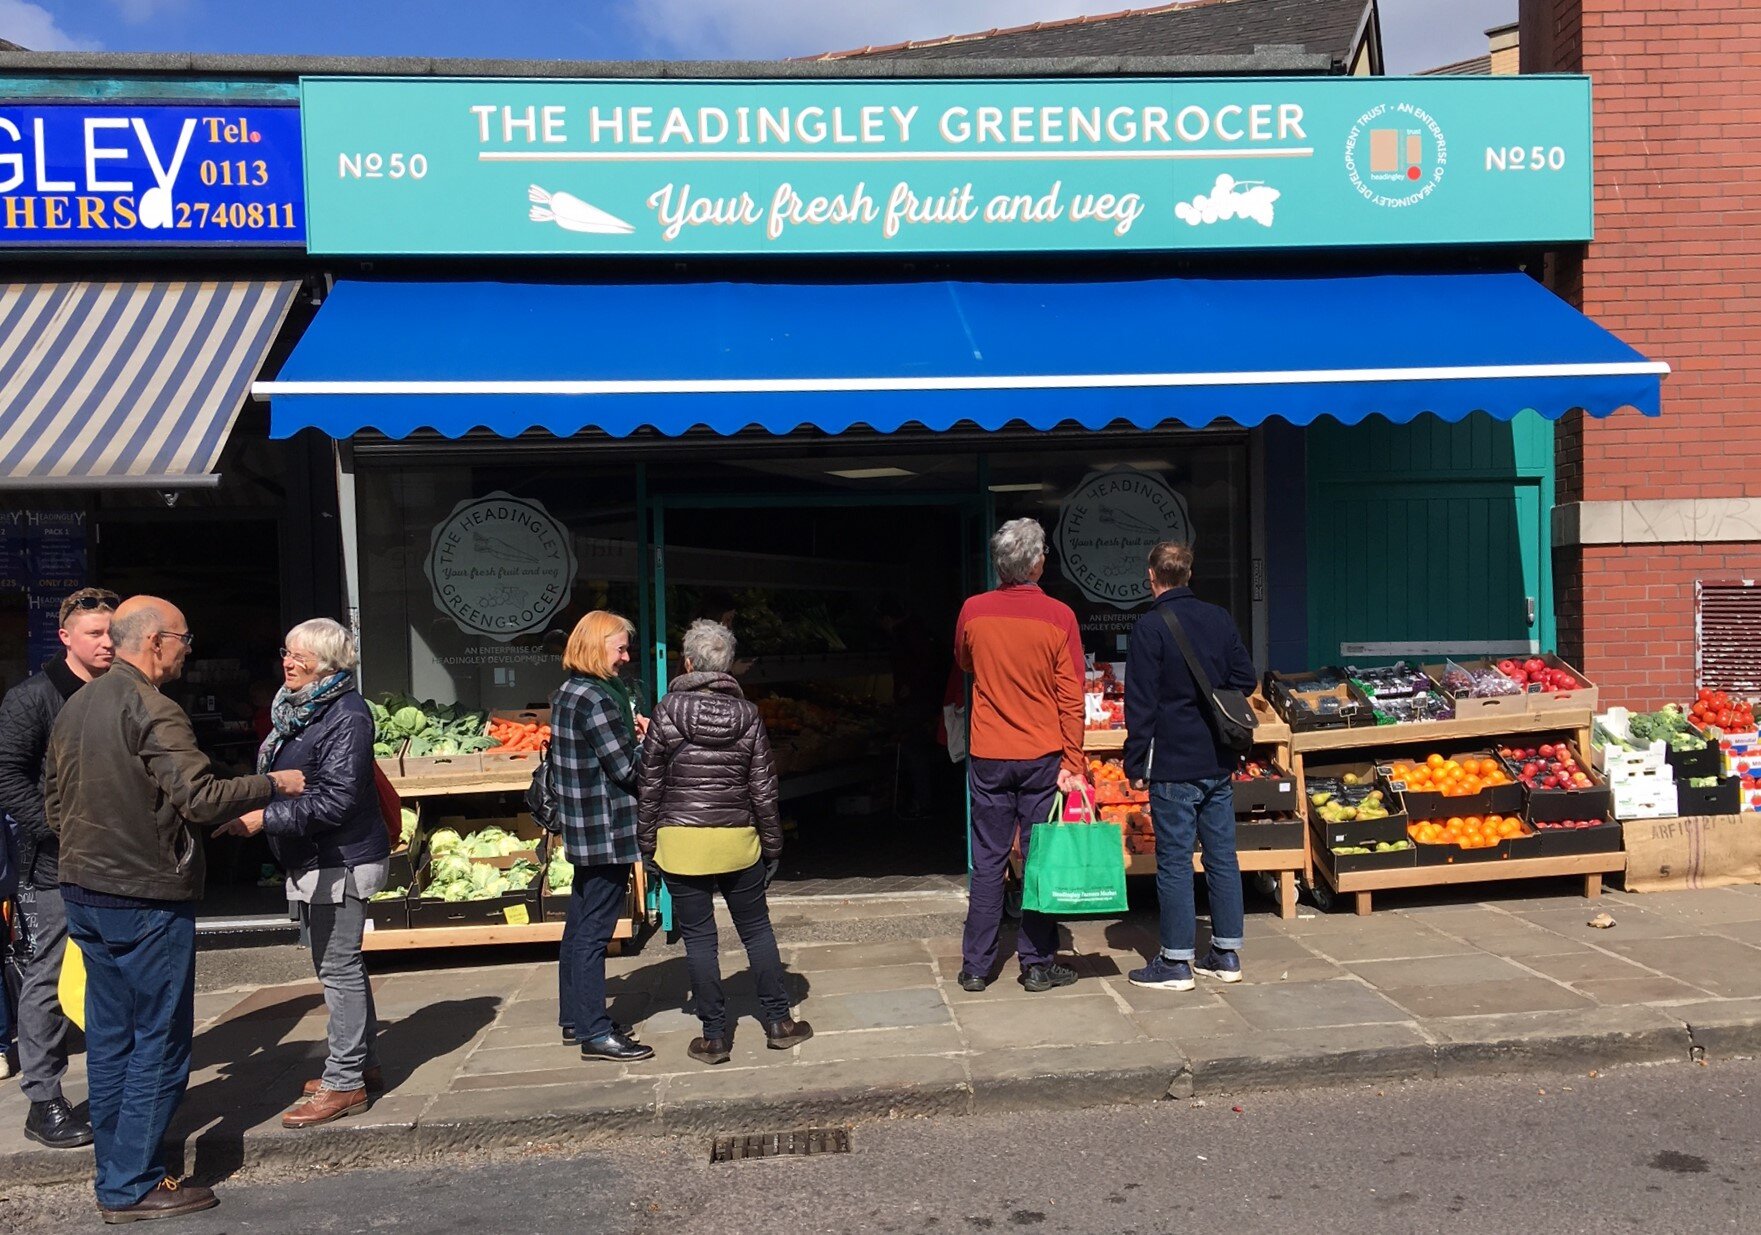 G is for Greengrocer